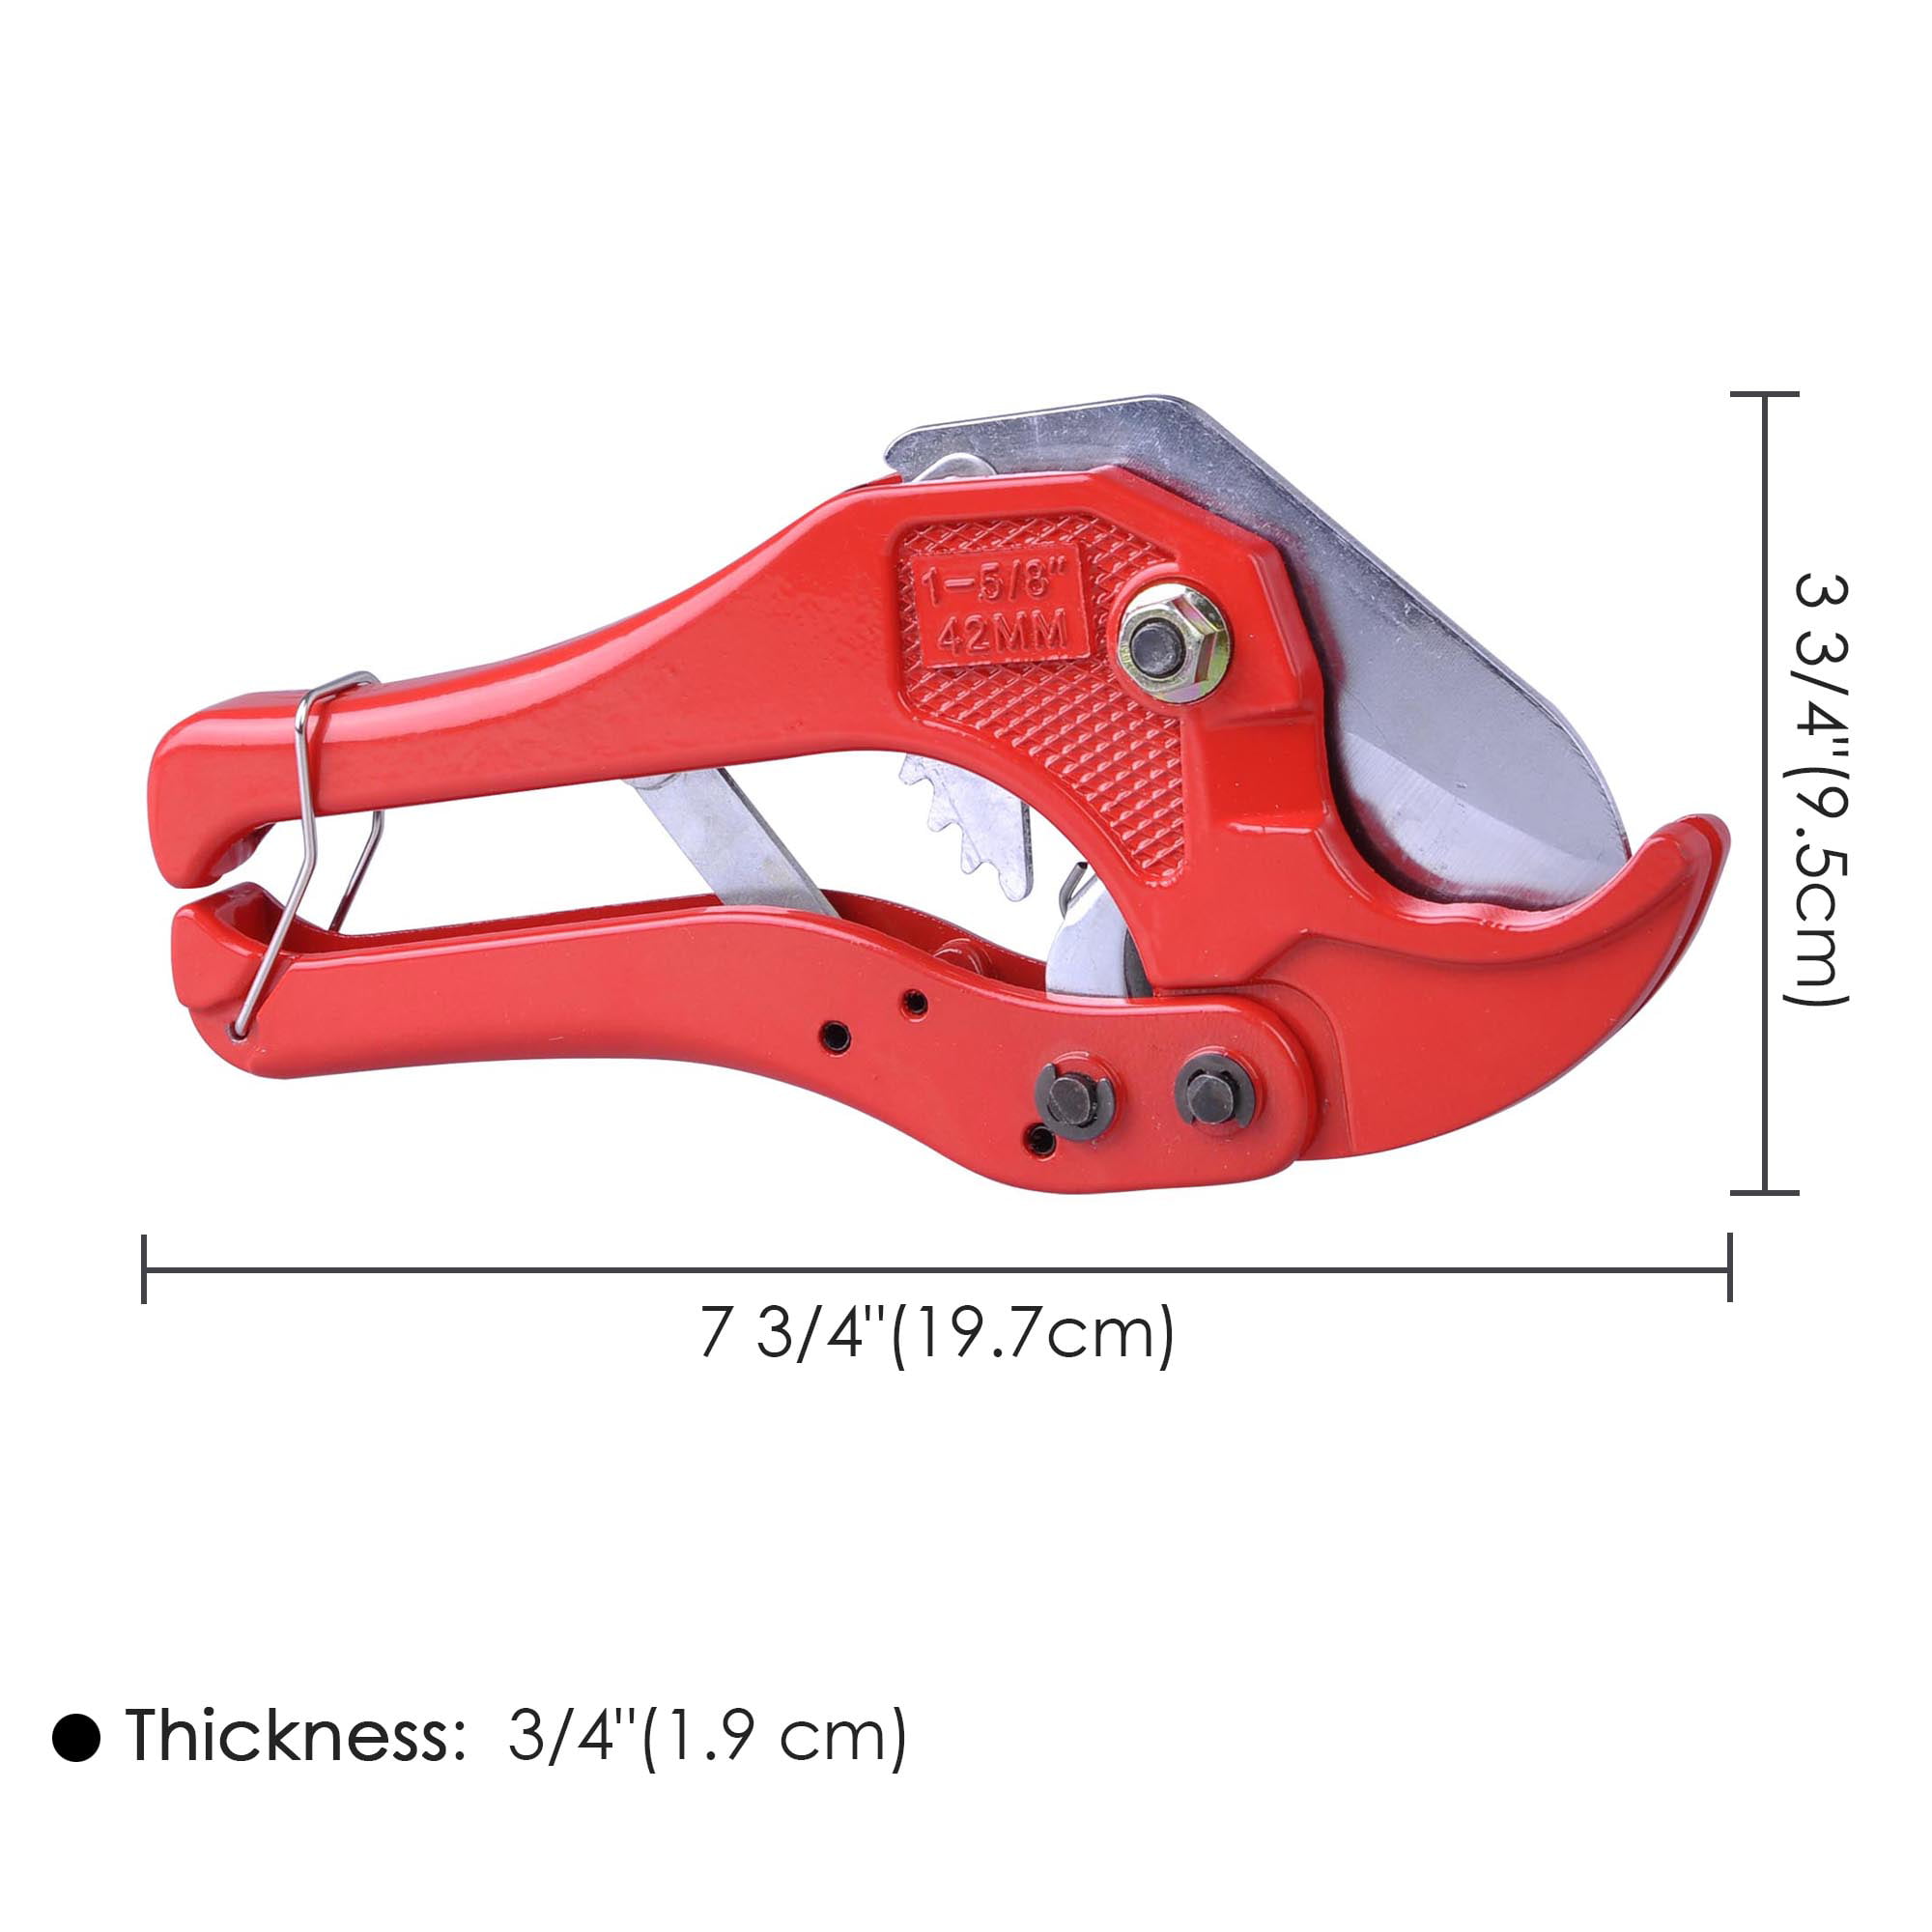 Petgin PVC Cutter 1-5/8, PVC Pipe Cutter, Ratcheting PVC Cutter, Plastic  Pipe Cutter, ABS Cutter for PVC, for Home Working and Plumber